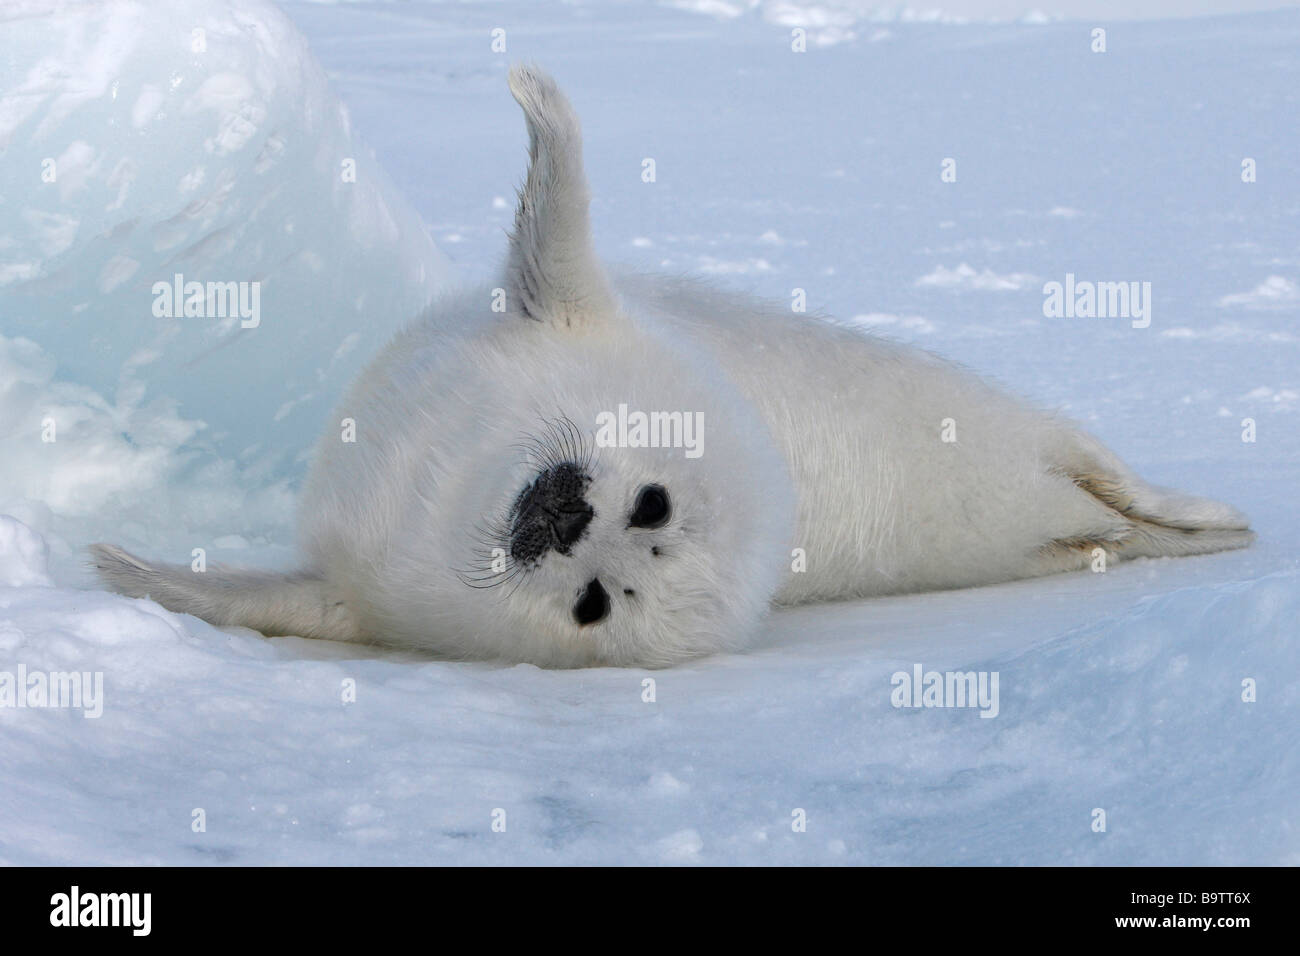 Harp Seal (Pagophilus groenlandicus). Playful pup (whitecoat) on ice Stock Photo